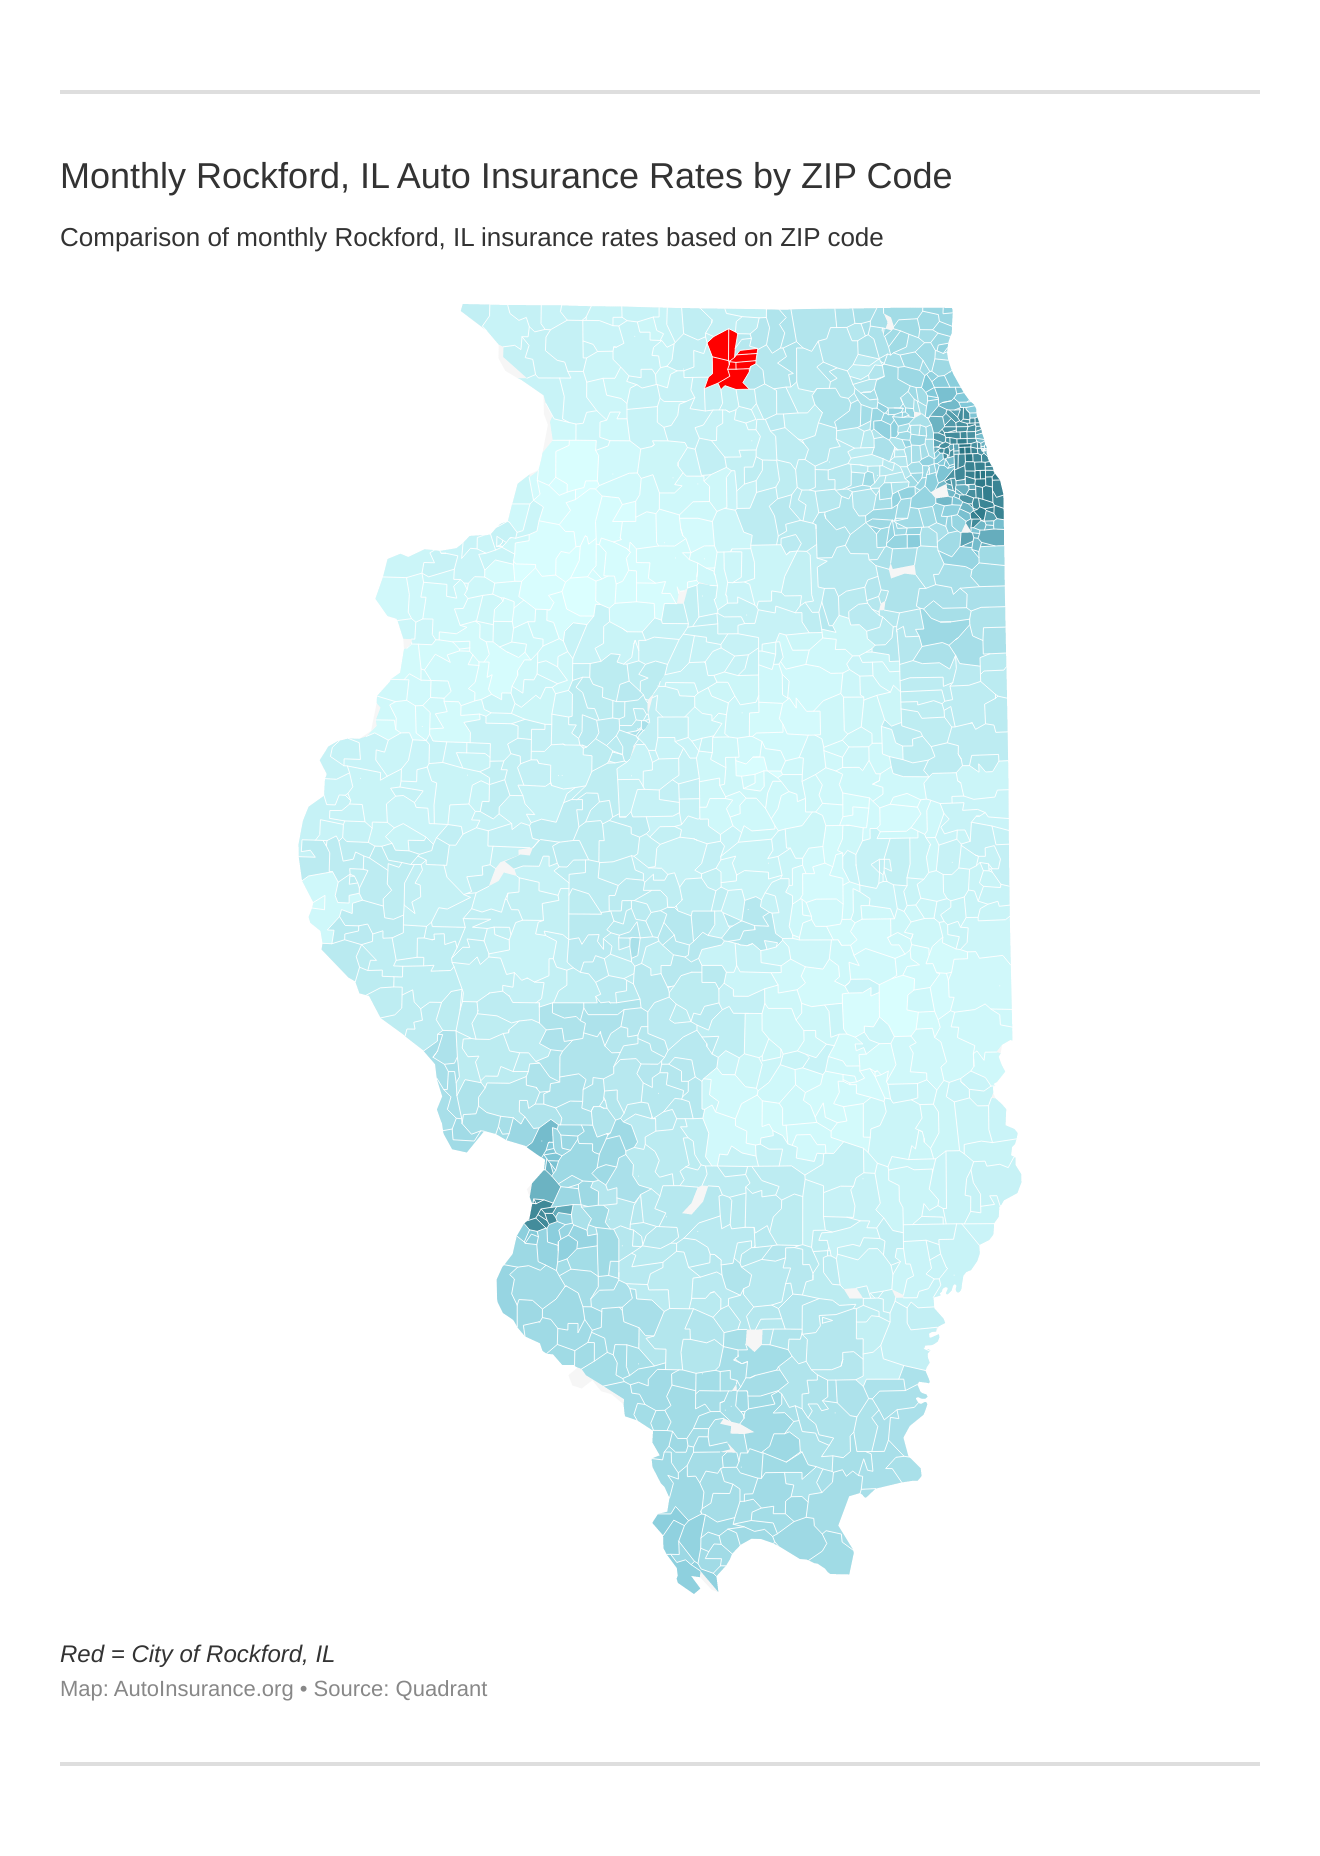 Monthly Rockford, IL Auto Insurance Rates by ZIP Code